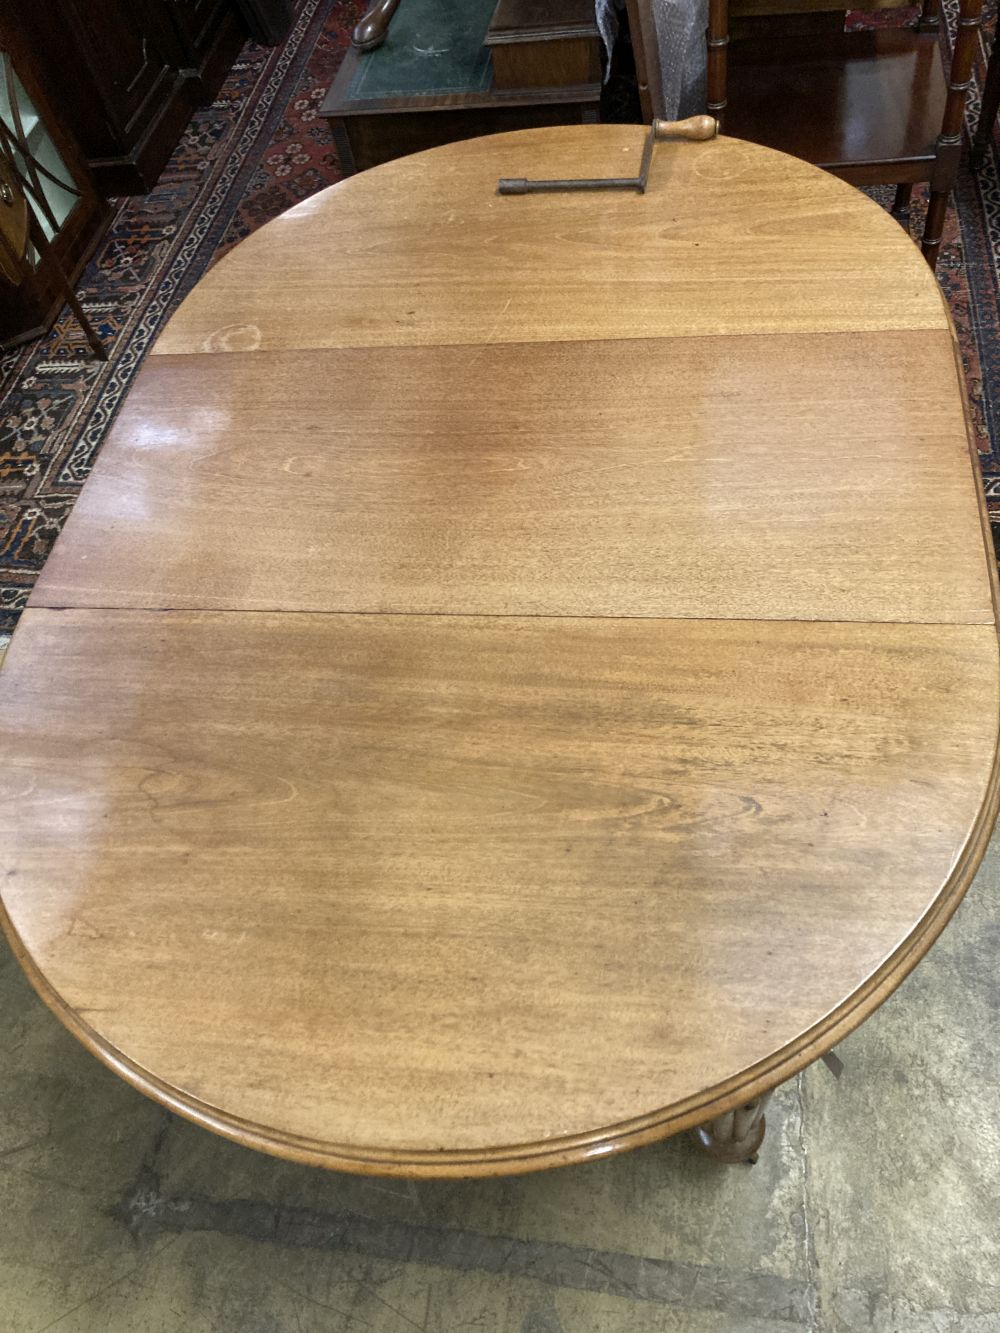 A Victorian mahogany oval extending dining table, with two spare leaves, 220cm extended, width 120cm, height 72cm